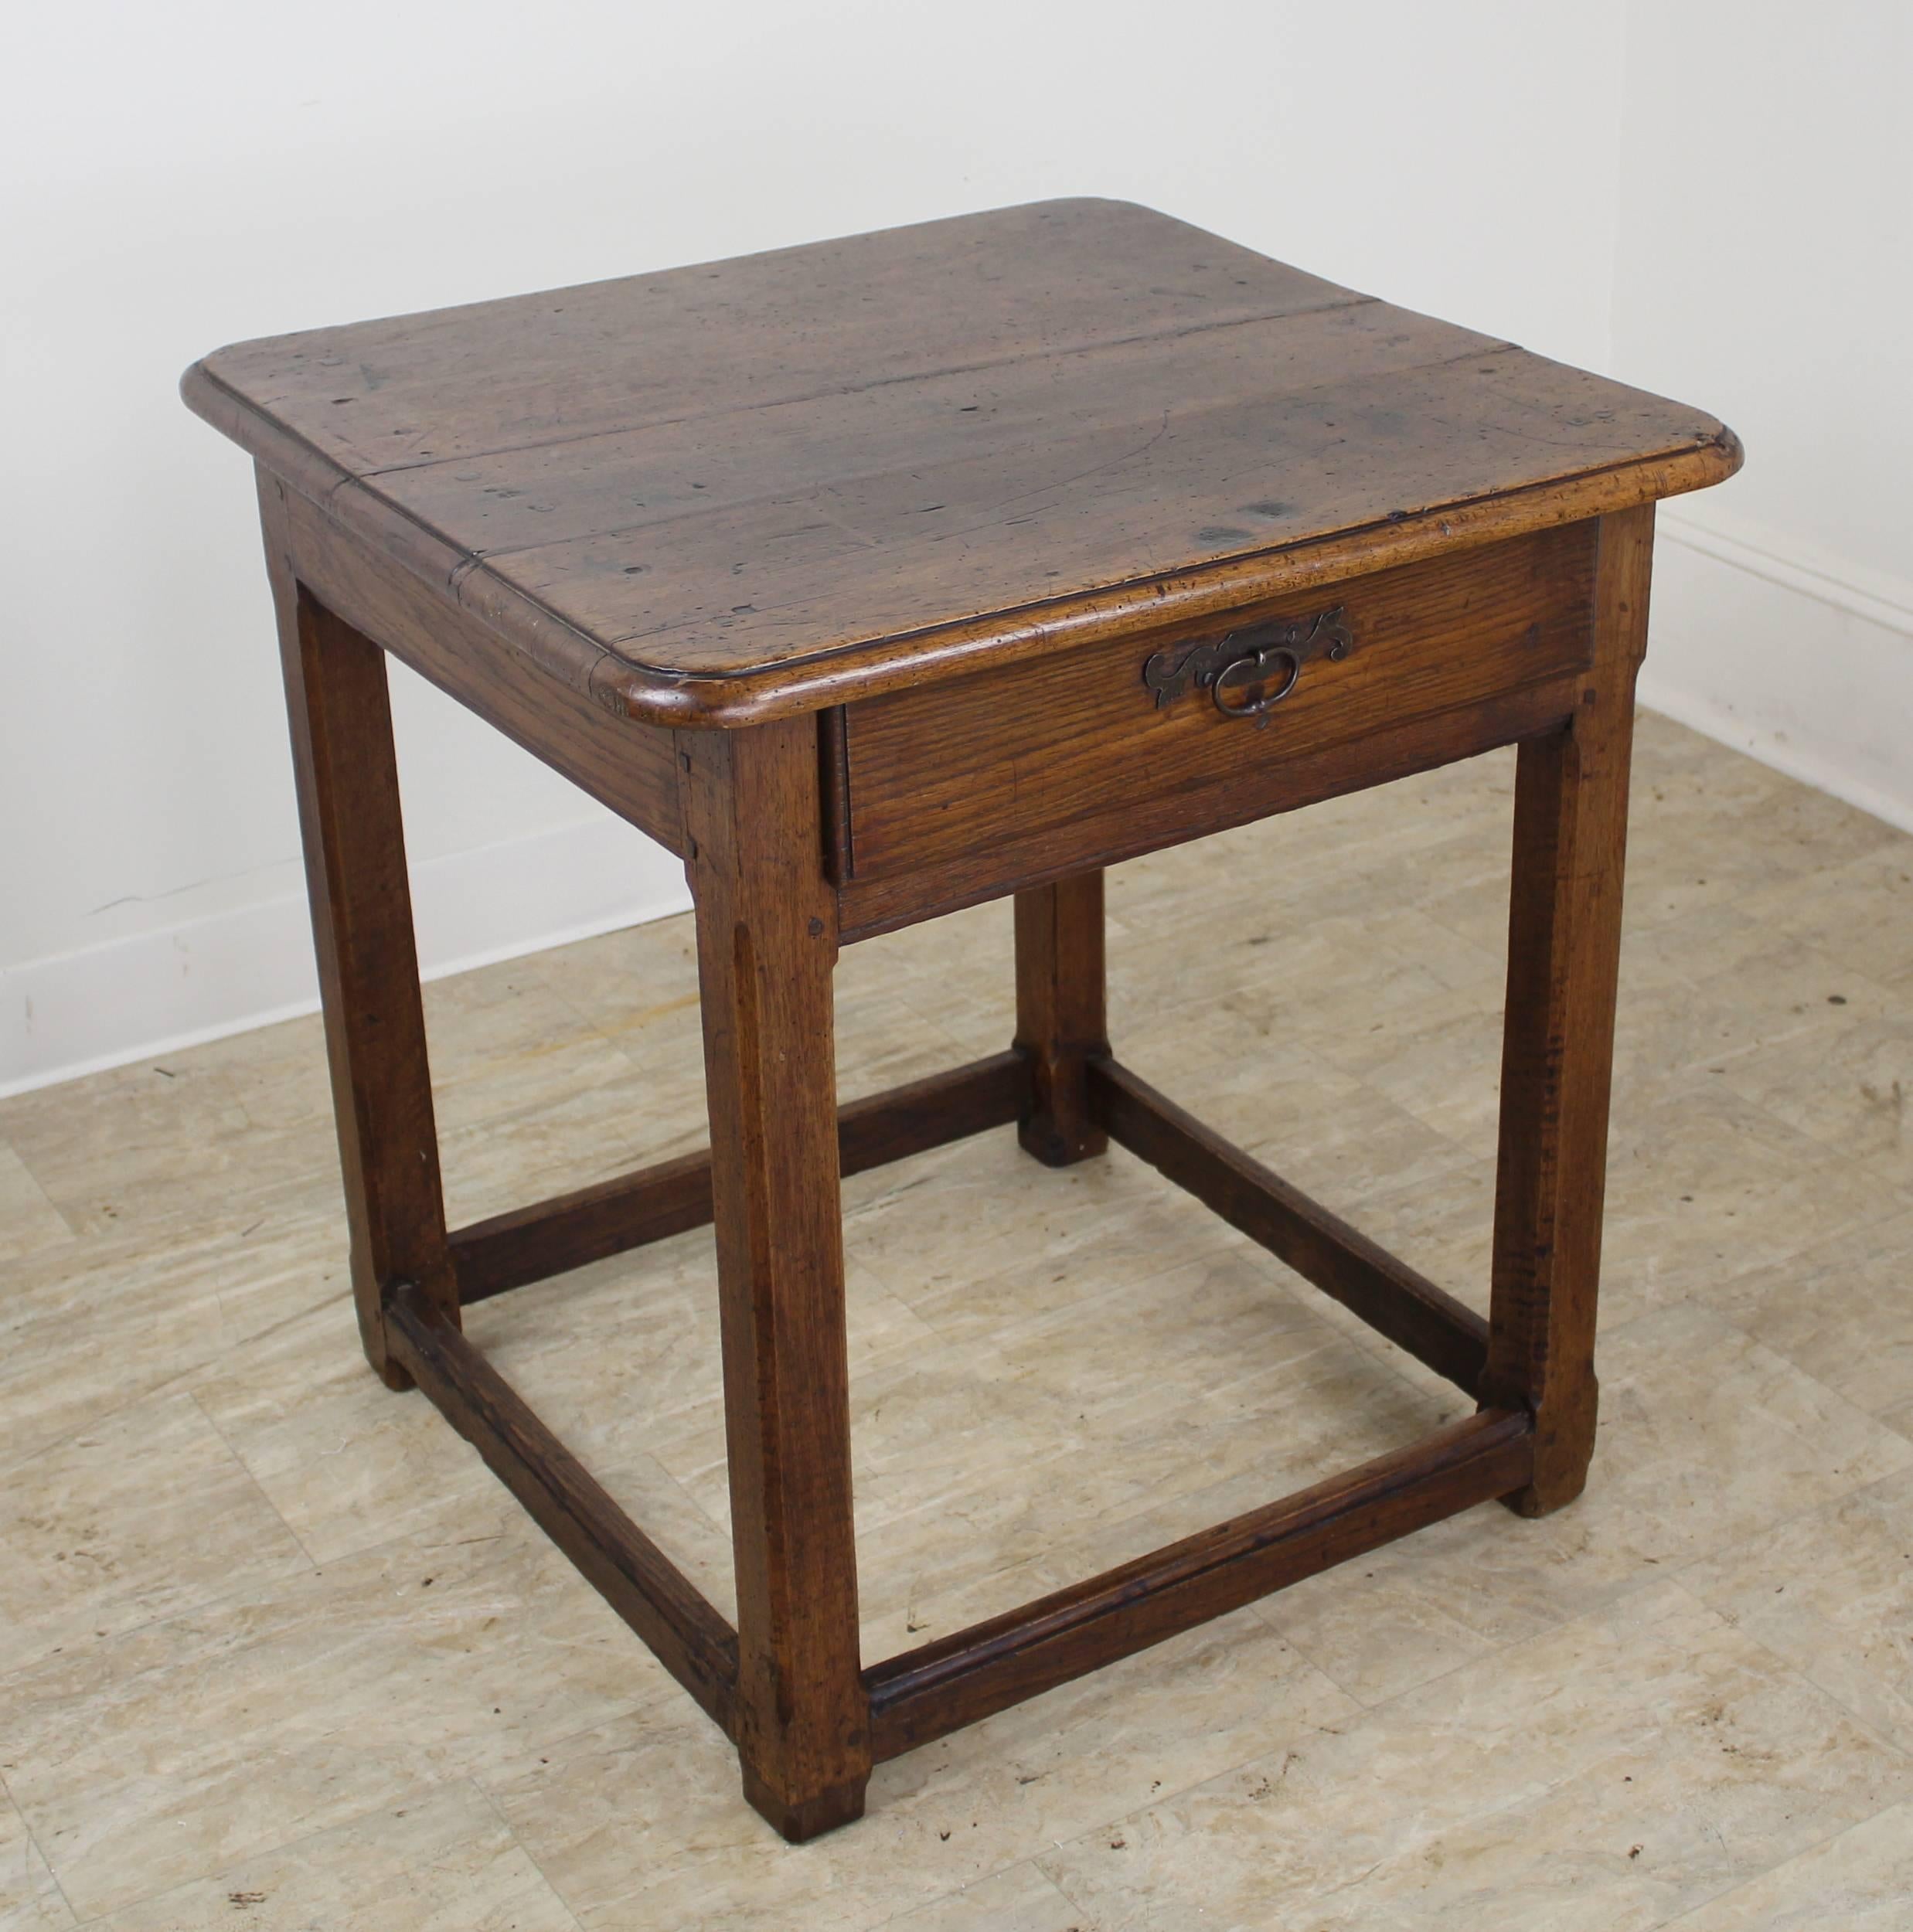 A handsome early walnut side table with original iron hardware and a stretcher base. Wonderful dark color and good patina. Would make a good lamp or occasional table.